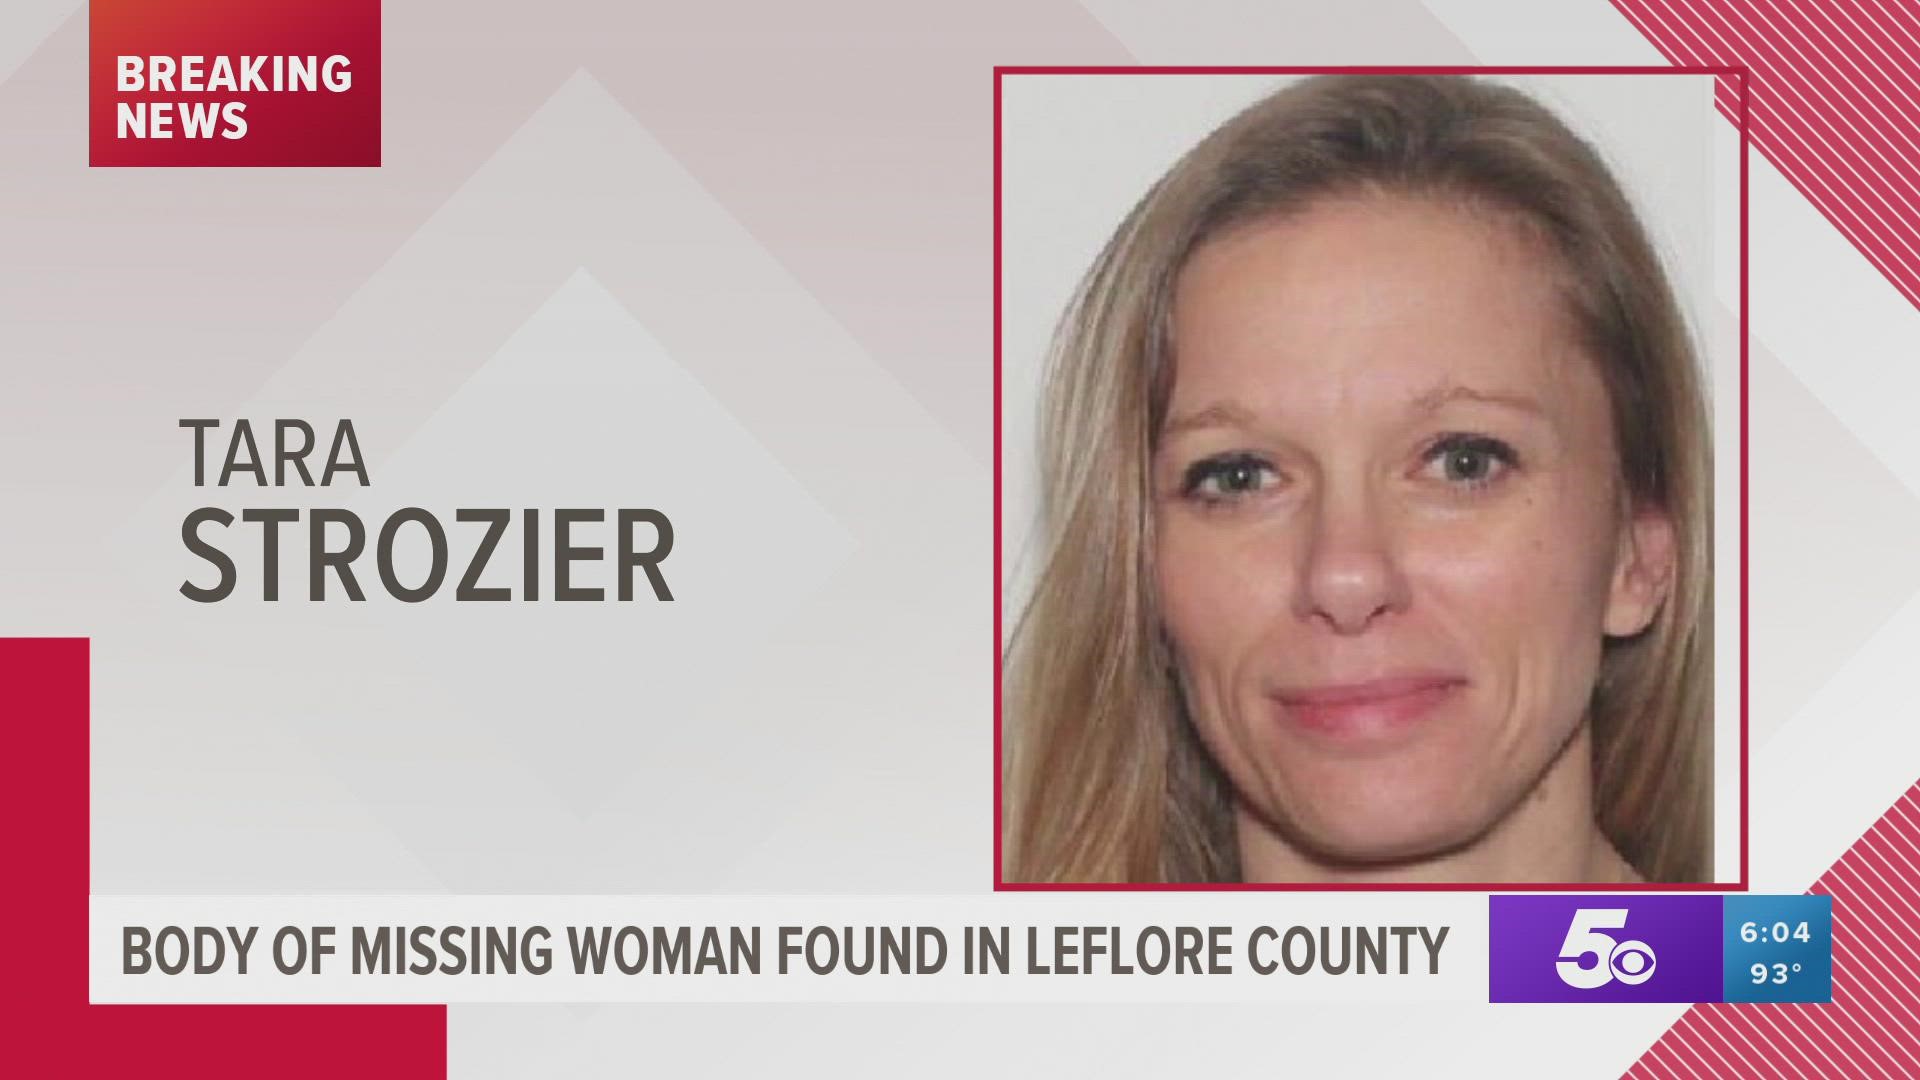 40-year-old Tara Strozier was listed as missing by police on July 19, 2021. Her body was located in a pond near Rock Island on Thursday.